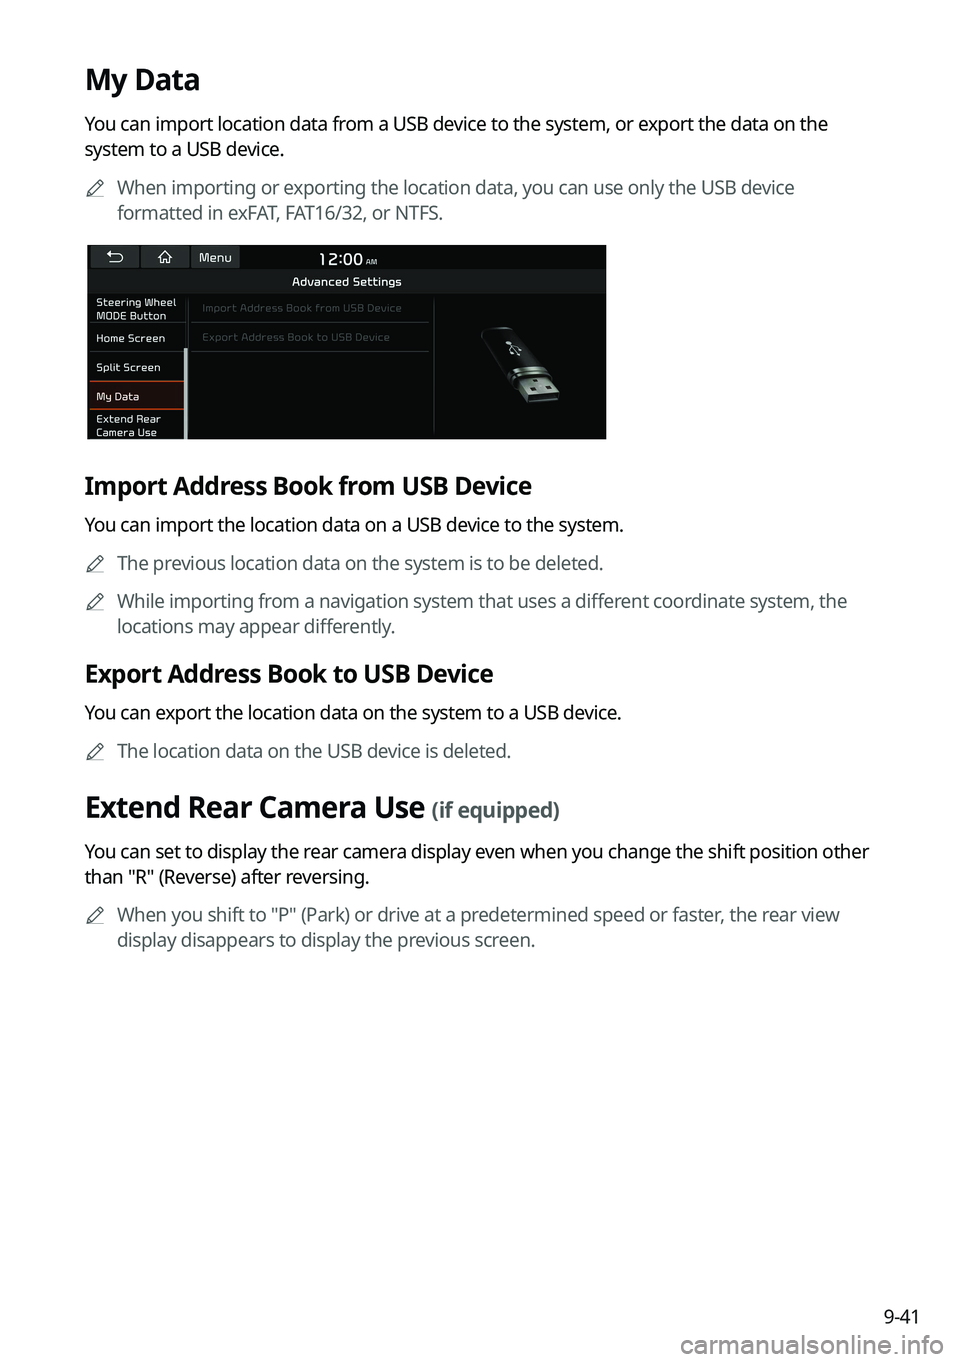 KIA FORTE 2022  Navigation System Quick Reference Guide 9-41
My Data
You can import location data from a USB device to the system, or export the data on the 
system to a USB device.0000
A
When importing or exporting the location data, you can use only the 